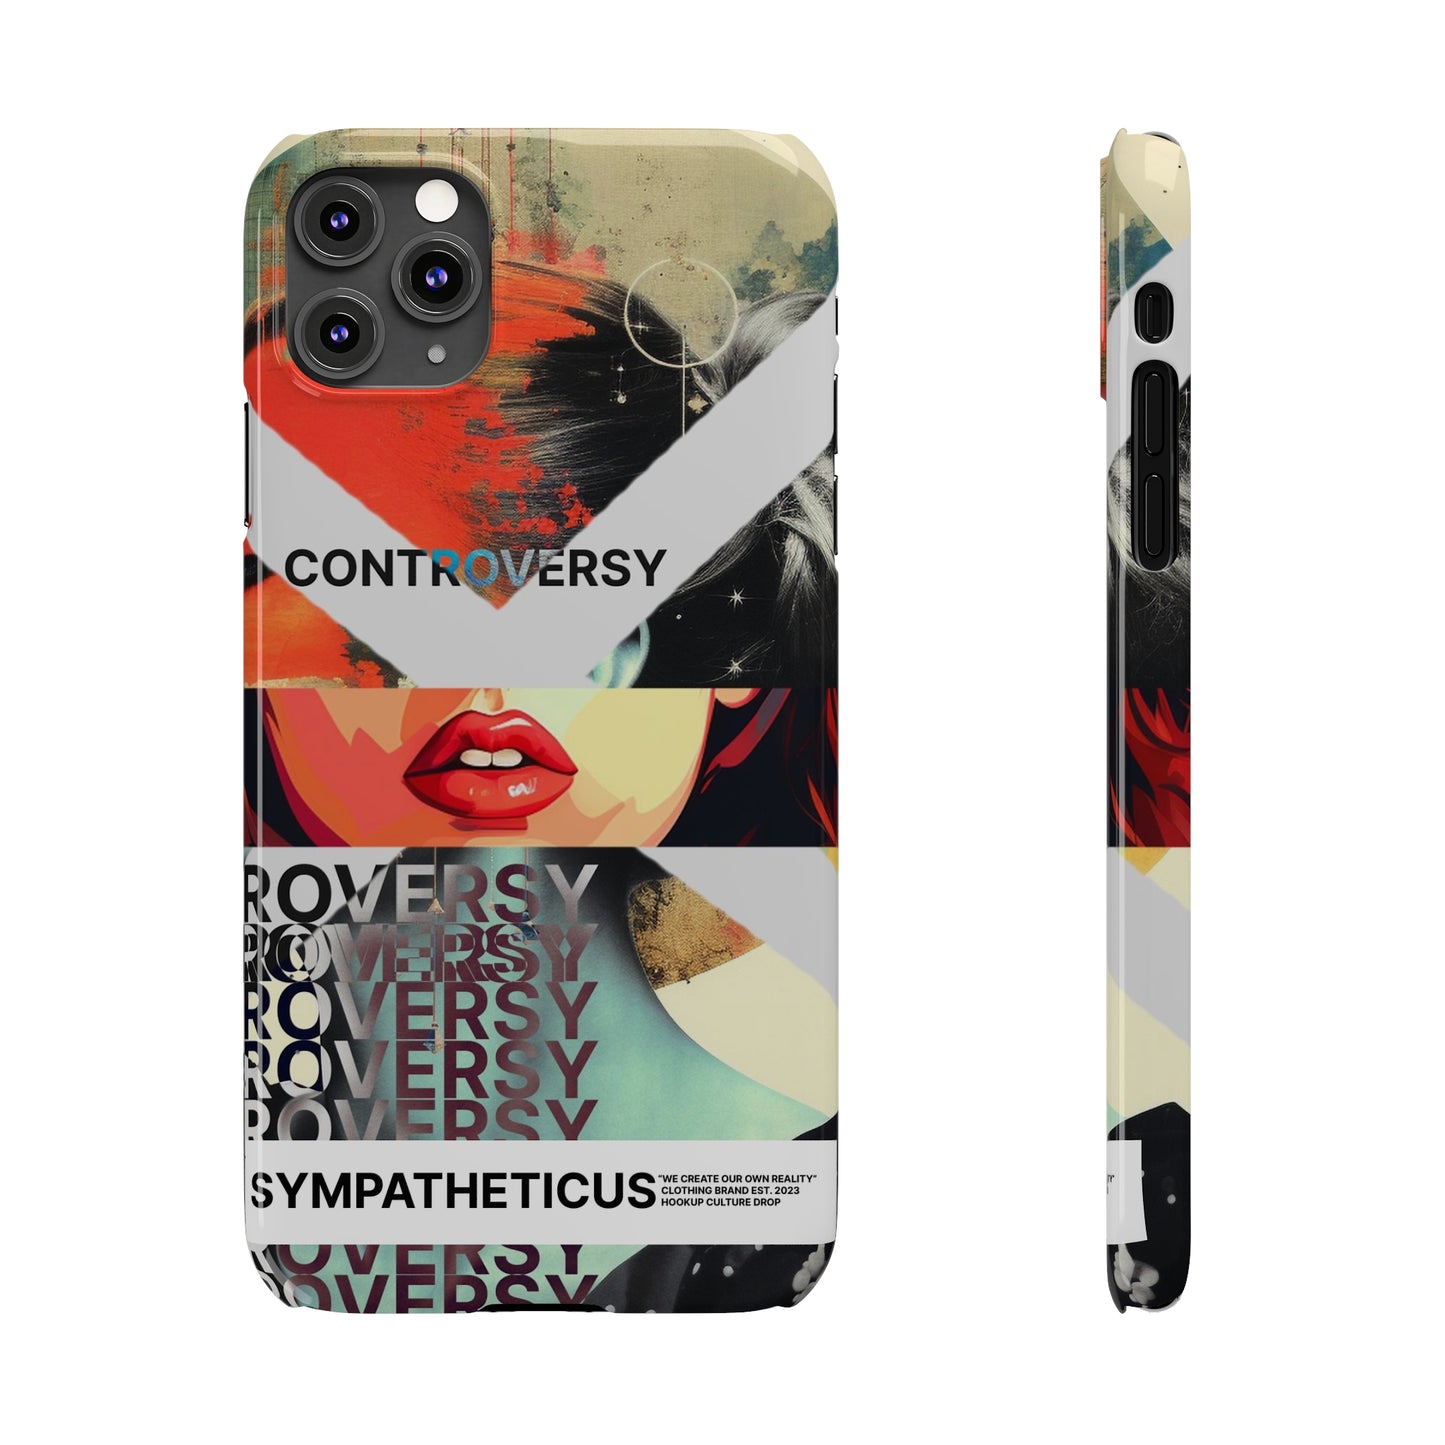 Hookup culture special iphone case-04